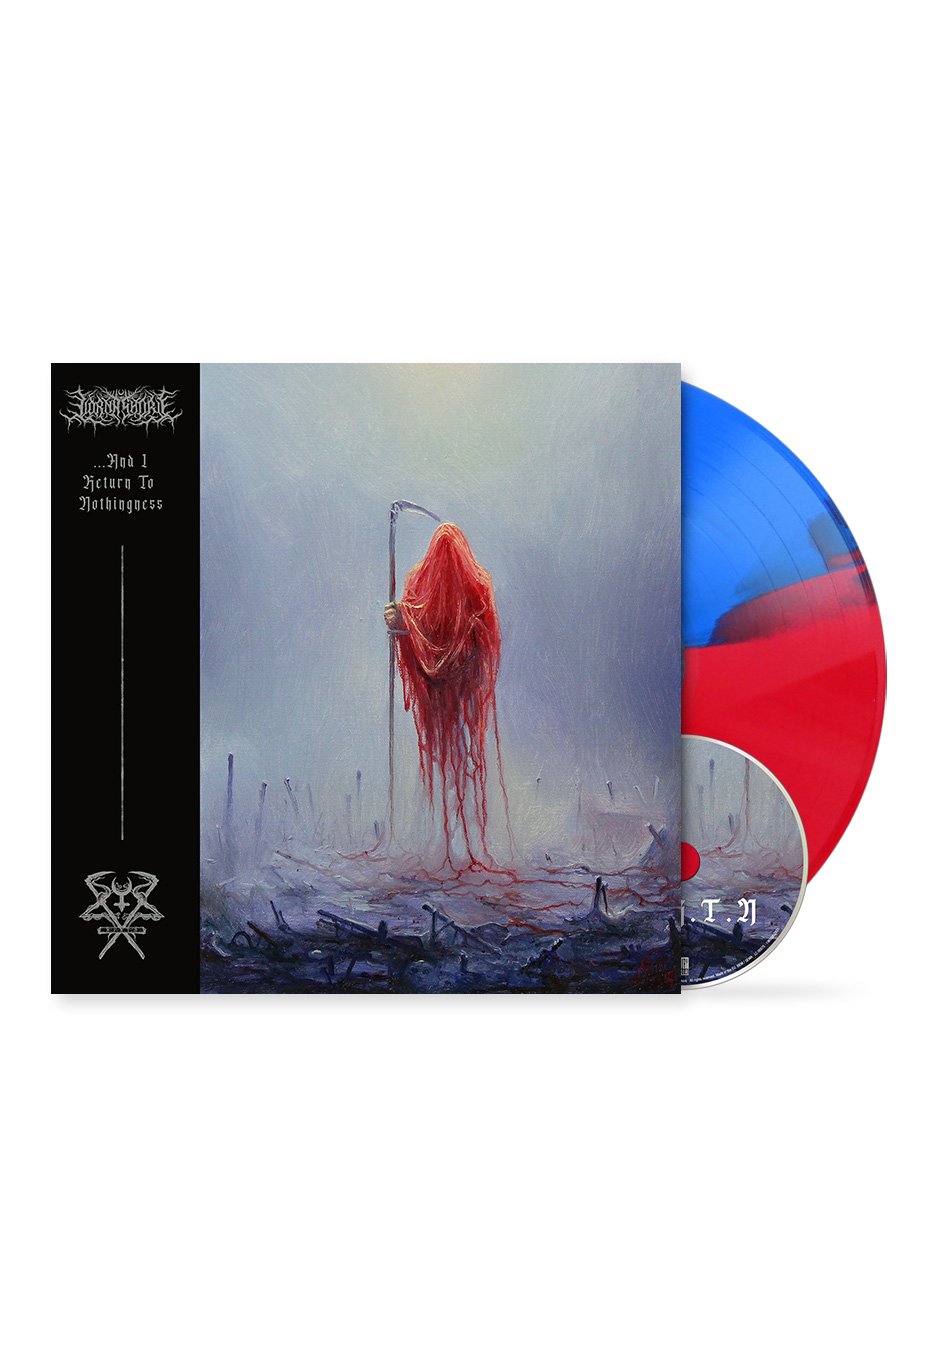 Lorna Shore - ...And I Return To Nothingness EP Ltd. Sky Blue Red Split - Colored Vinyl + CD